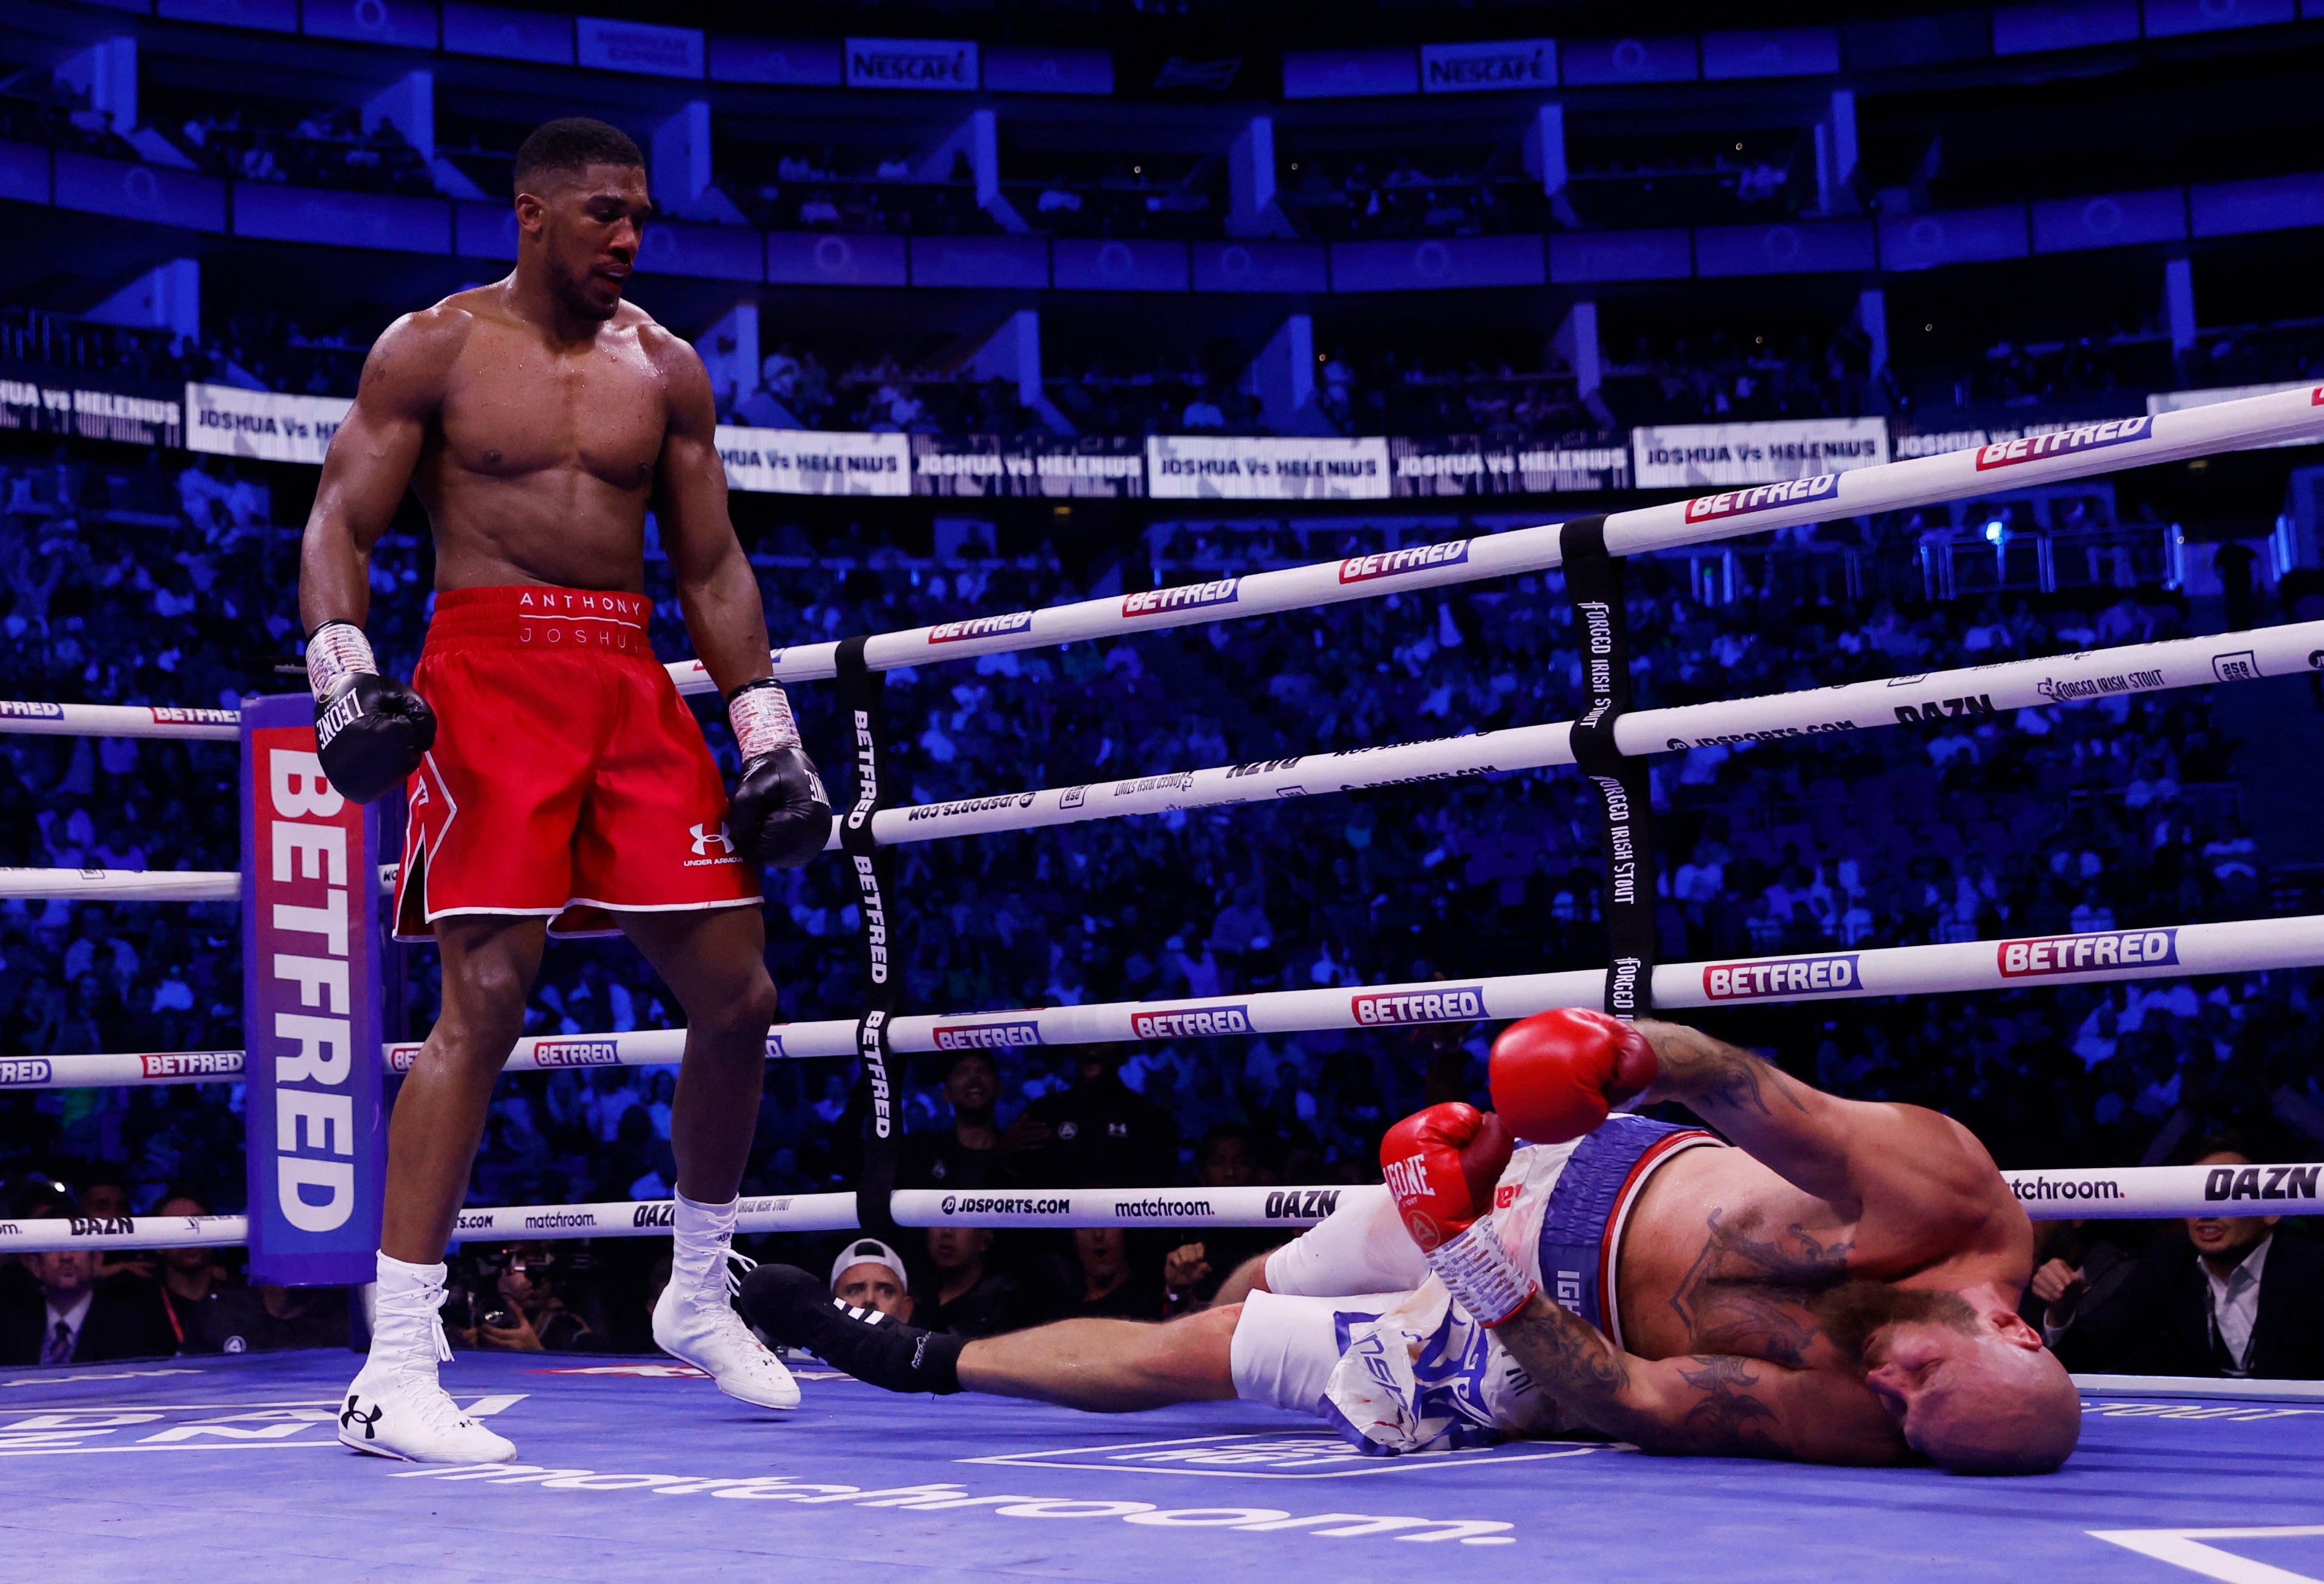 Joshua knocked Robert Helenius out cold in Round 7 on Saturday